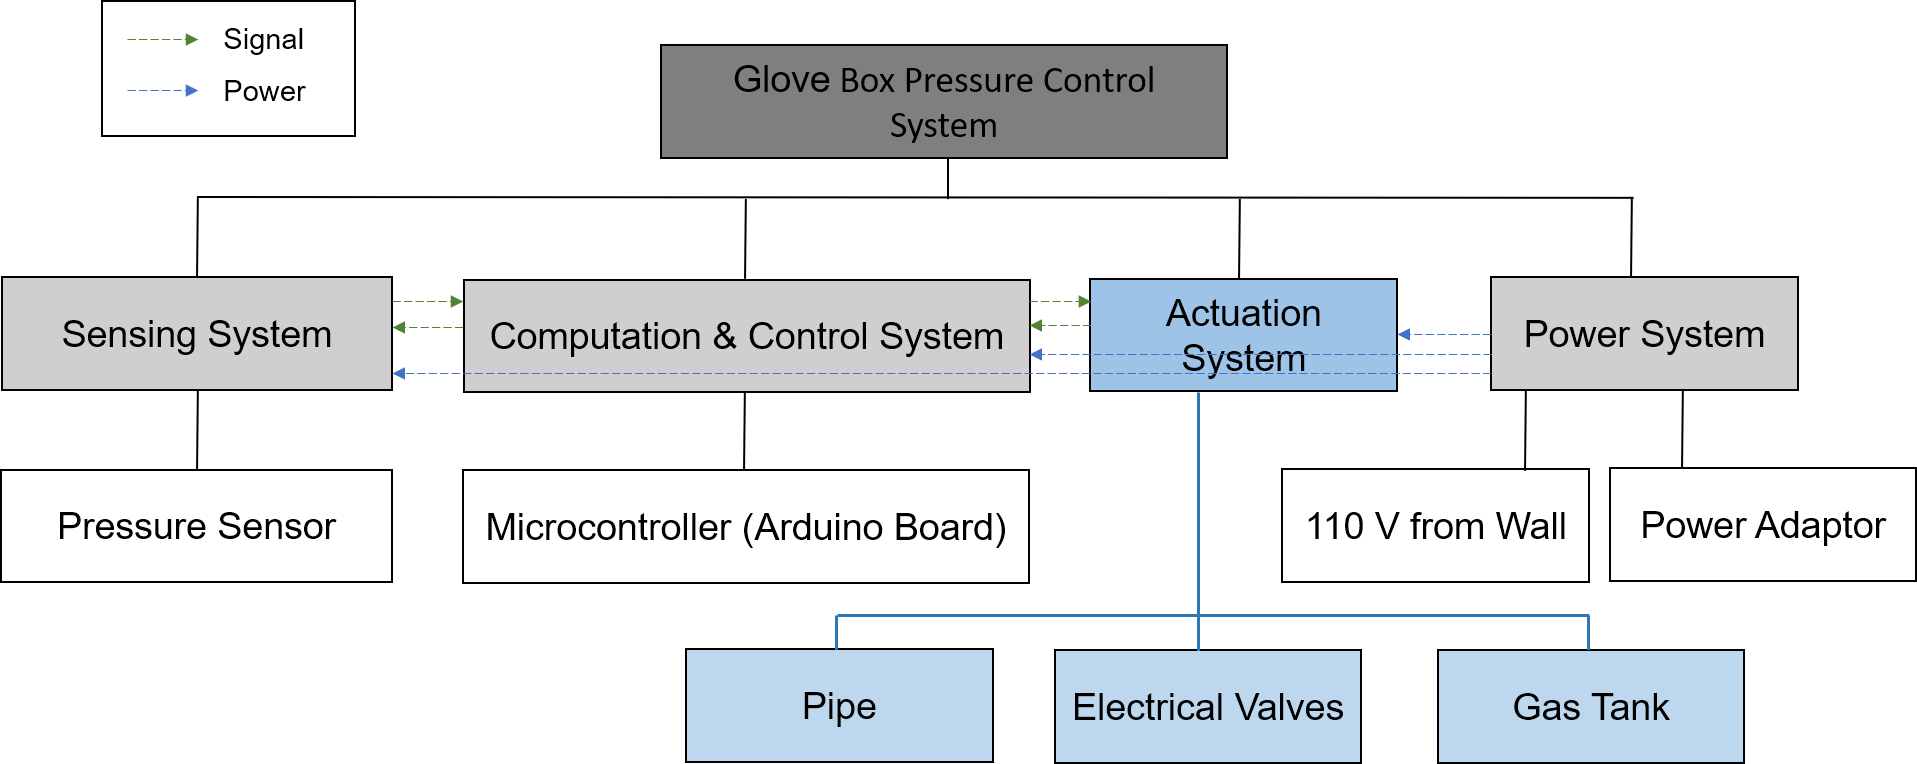 Physical decomposition of the system that controls the inflow and outflow of gas with electrical valves.